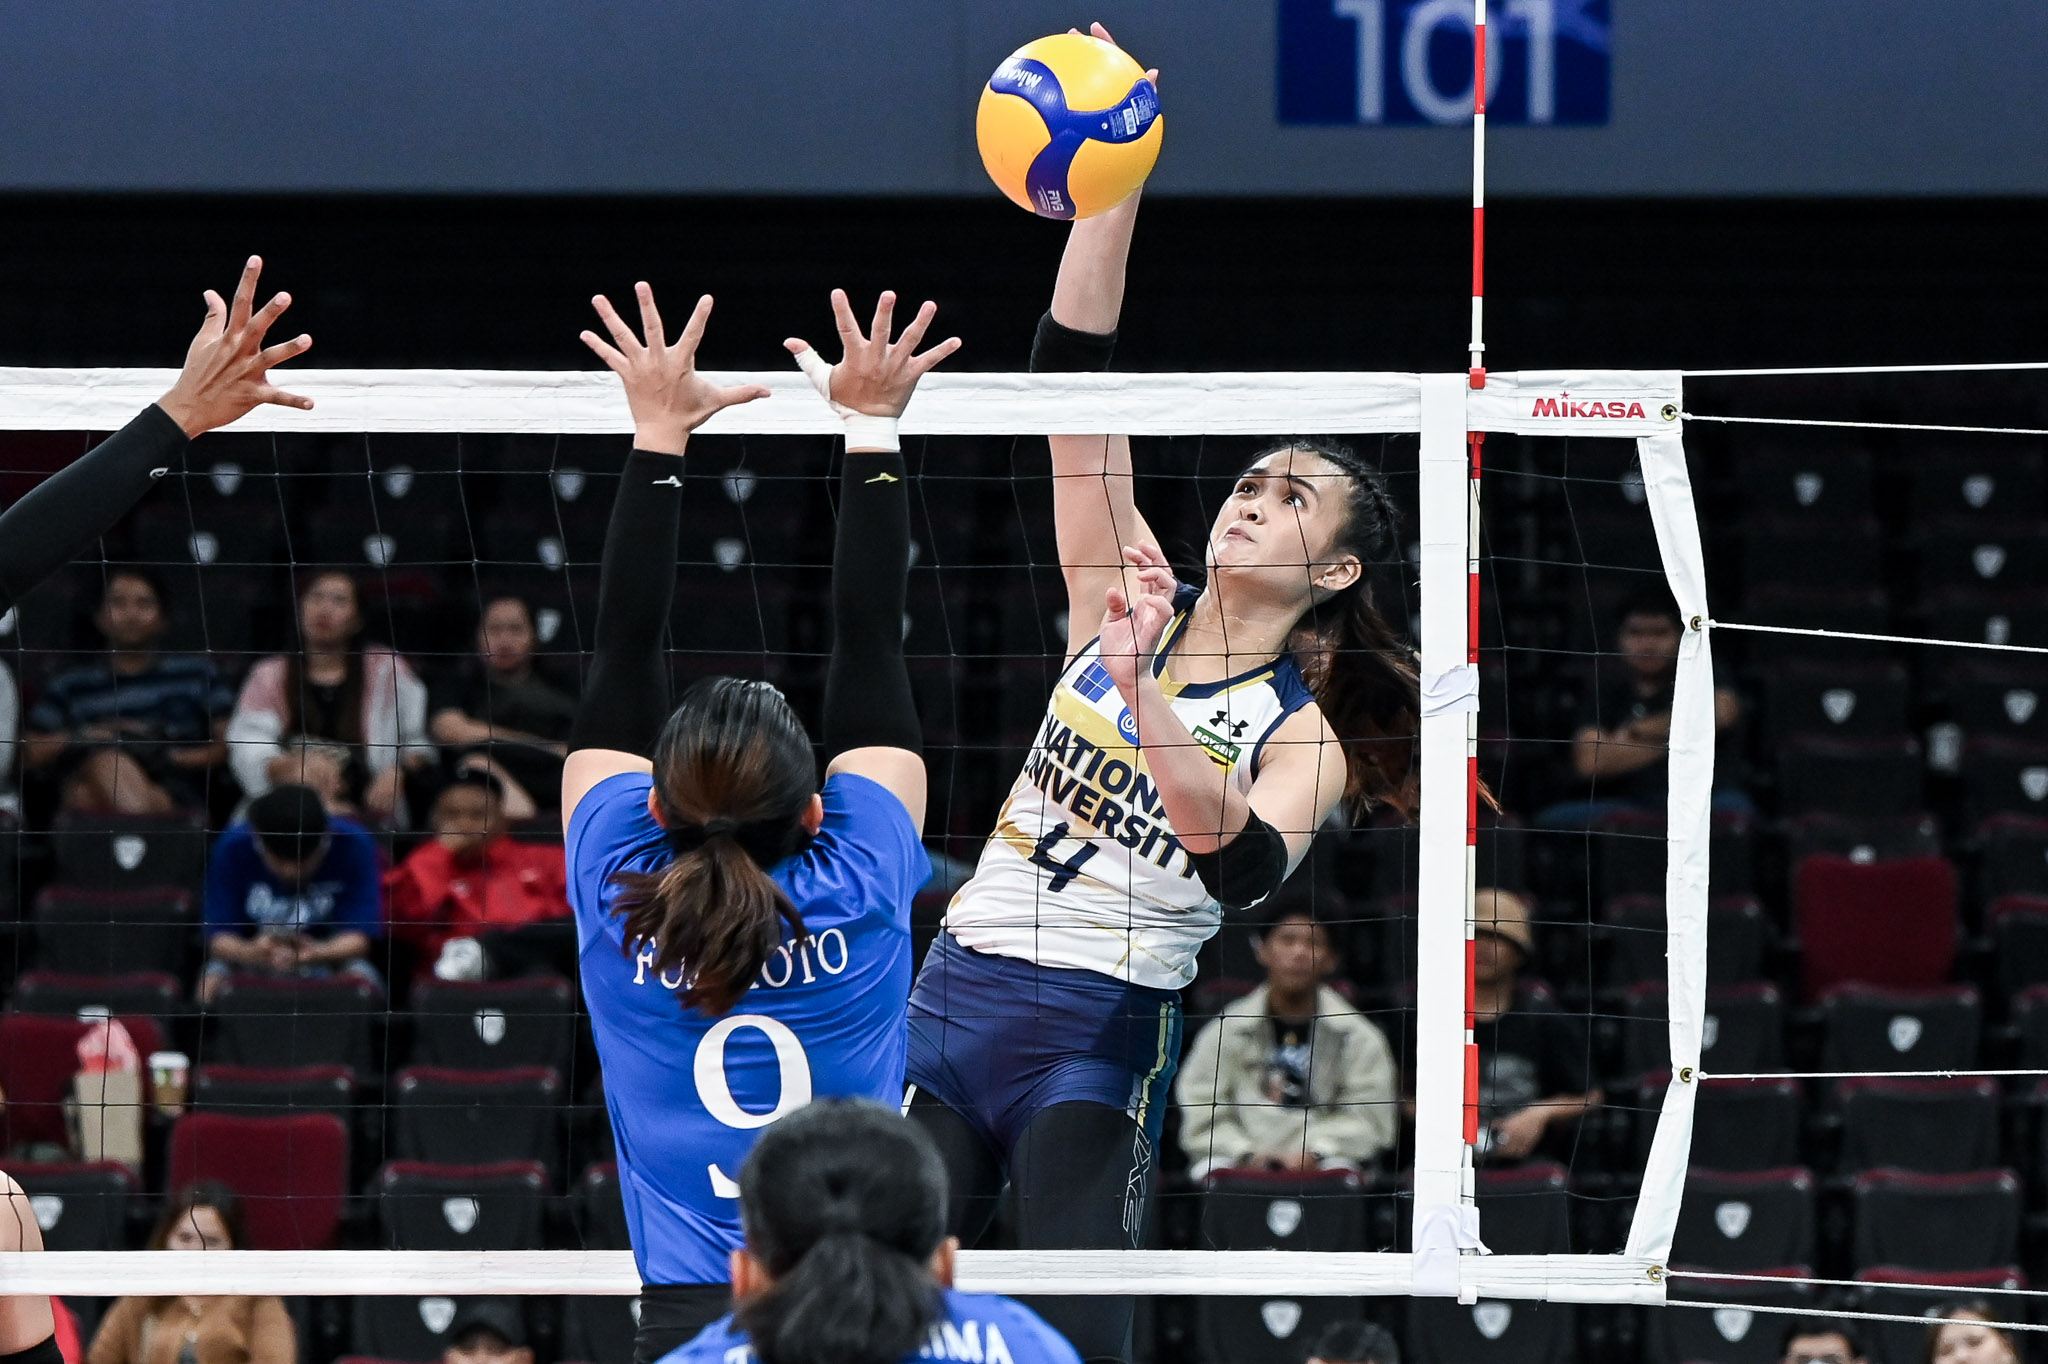 NU survives Ateneo upset scare, gets first win